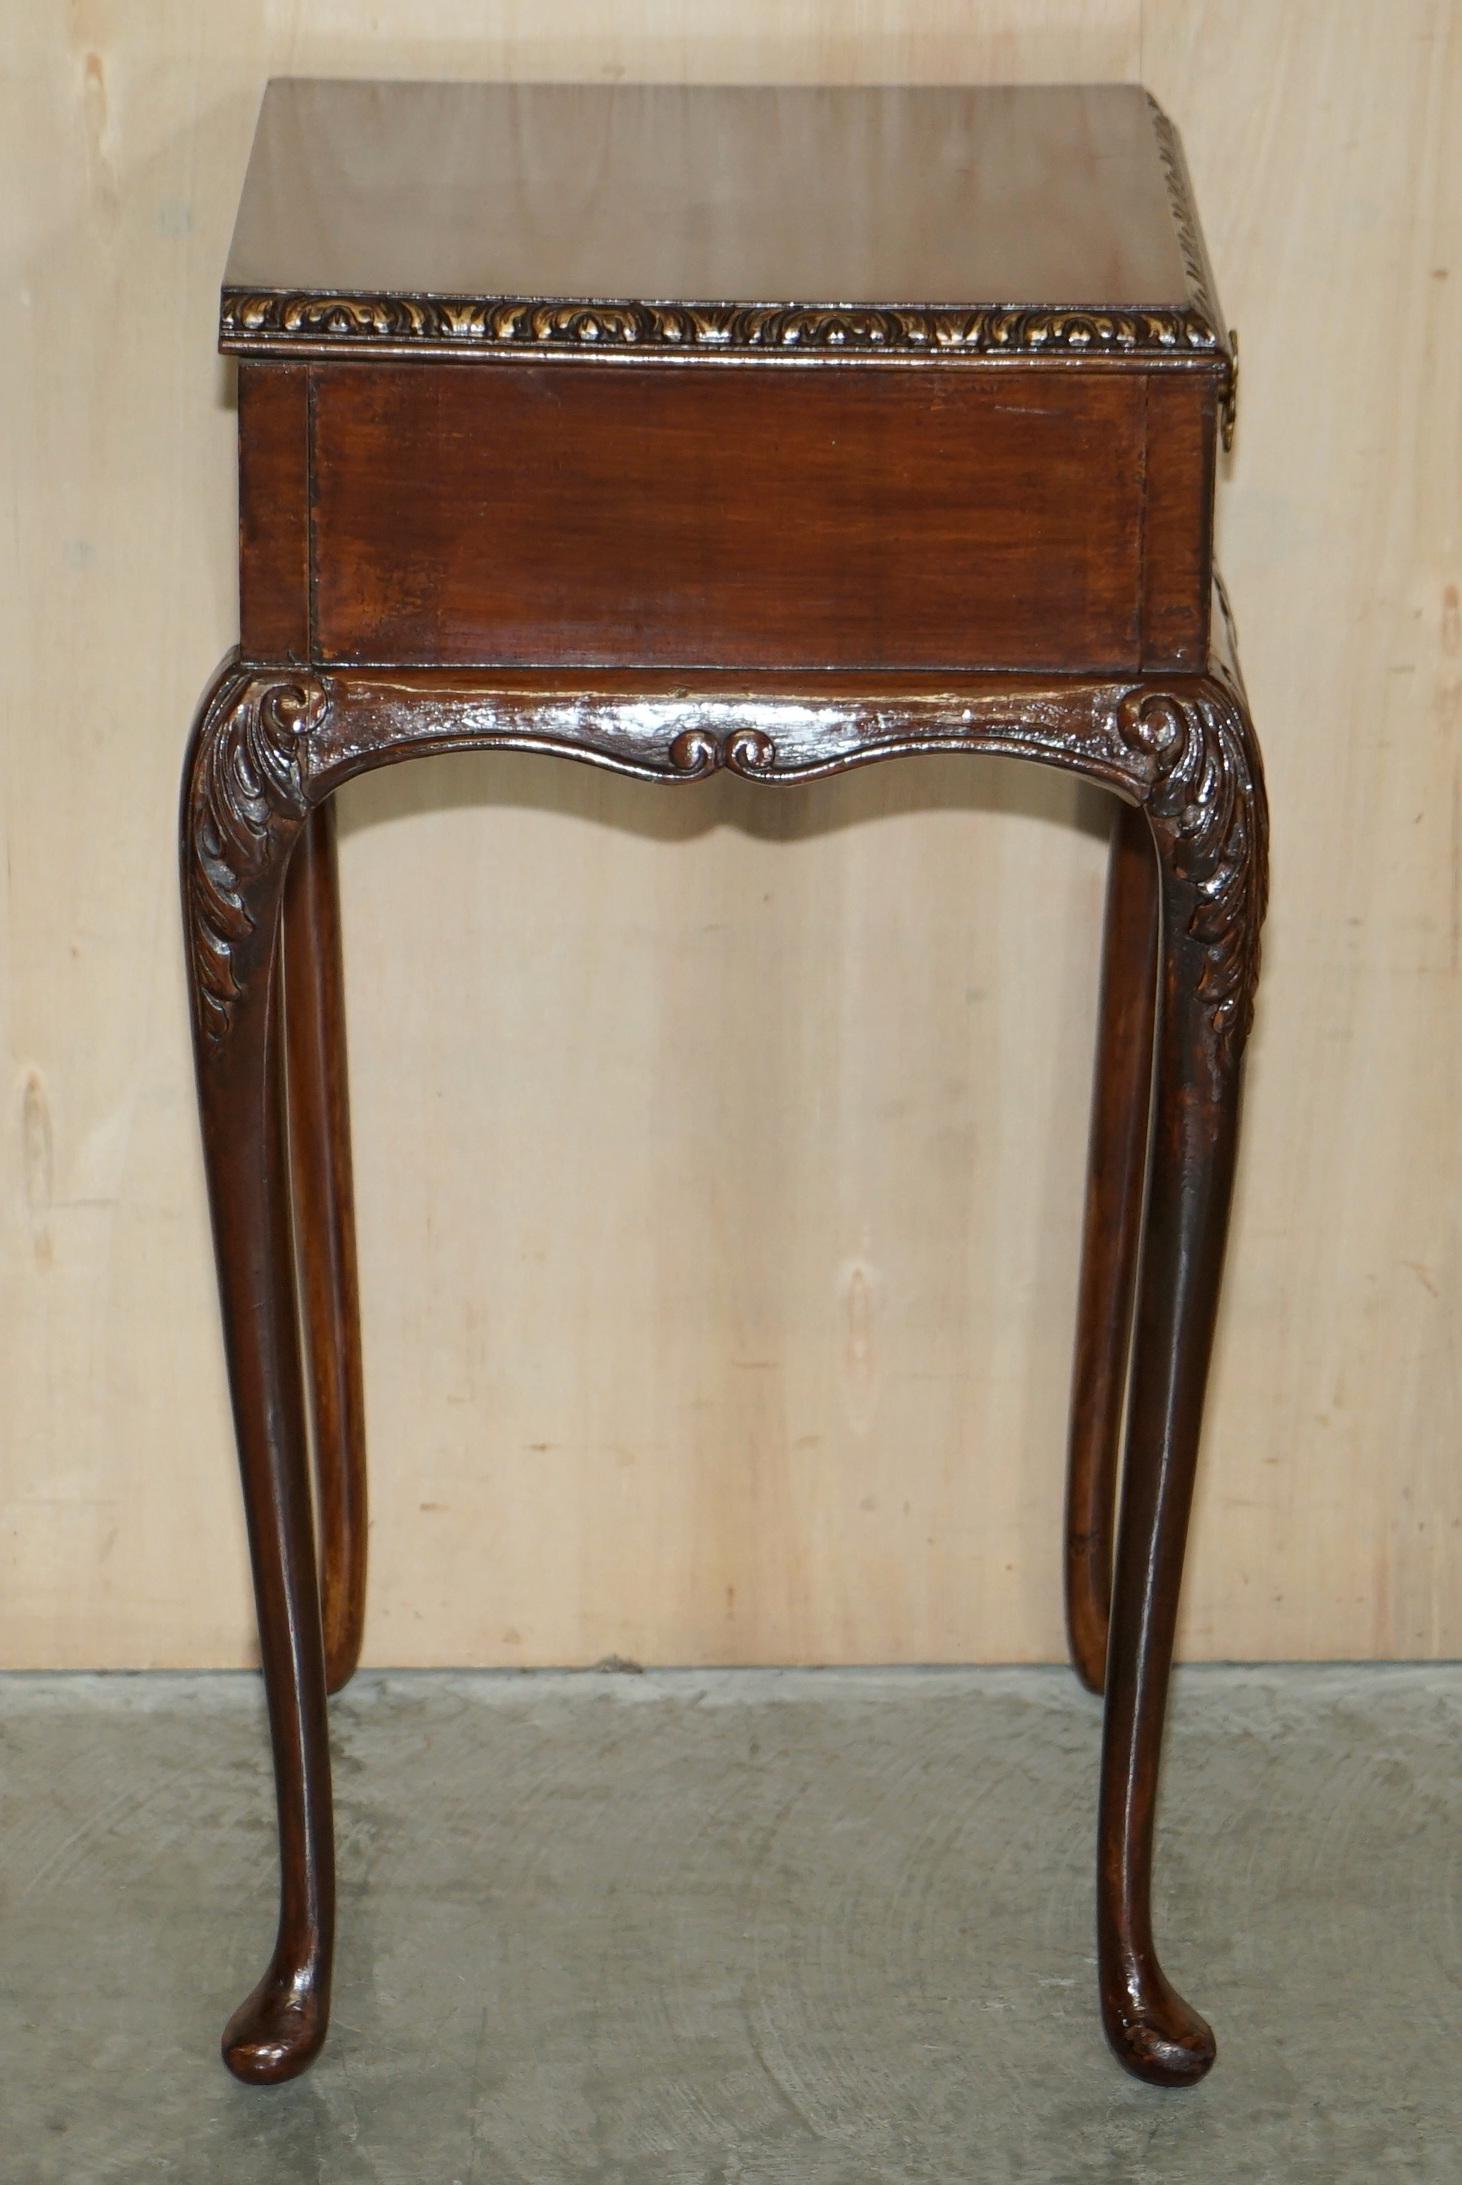 PAIR OF ANTIQUE VICTORIAN ELEGANT CABRIOLE LEGGED SINGLE DRAWER TALL SiDE TABLES For Sale 6